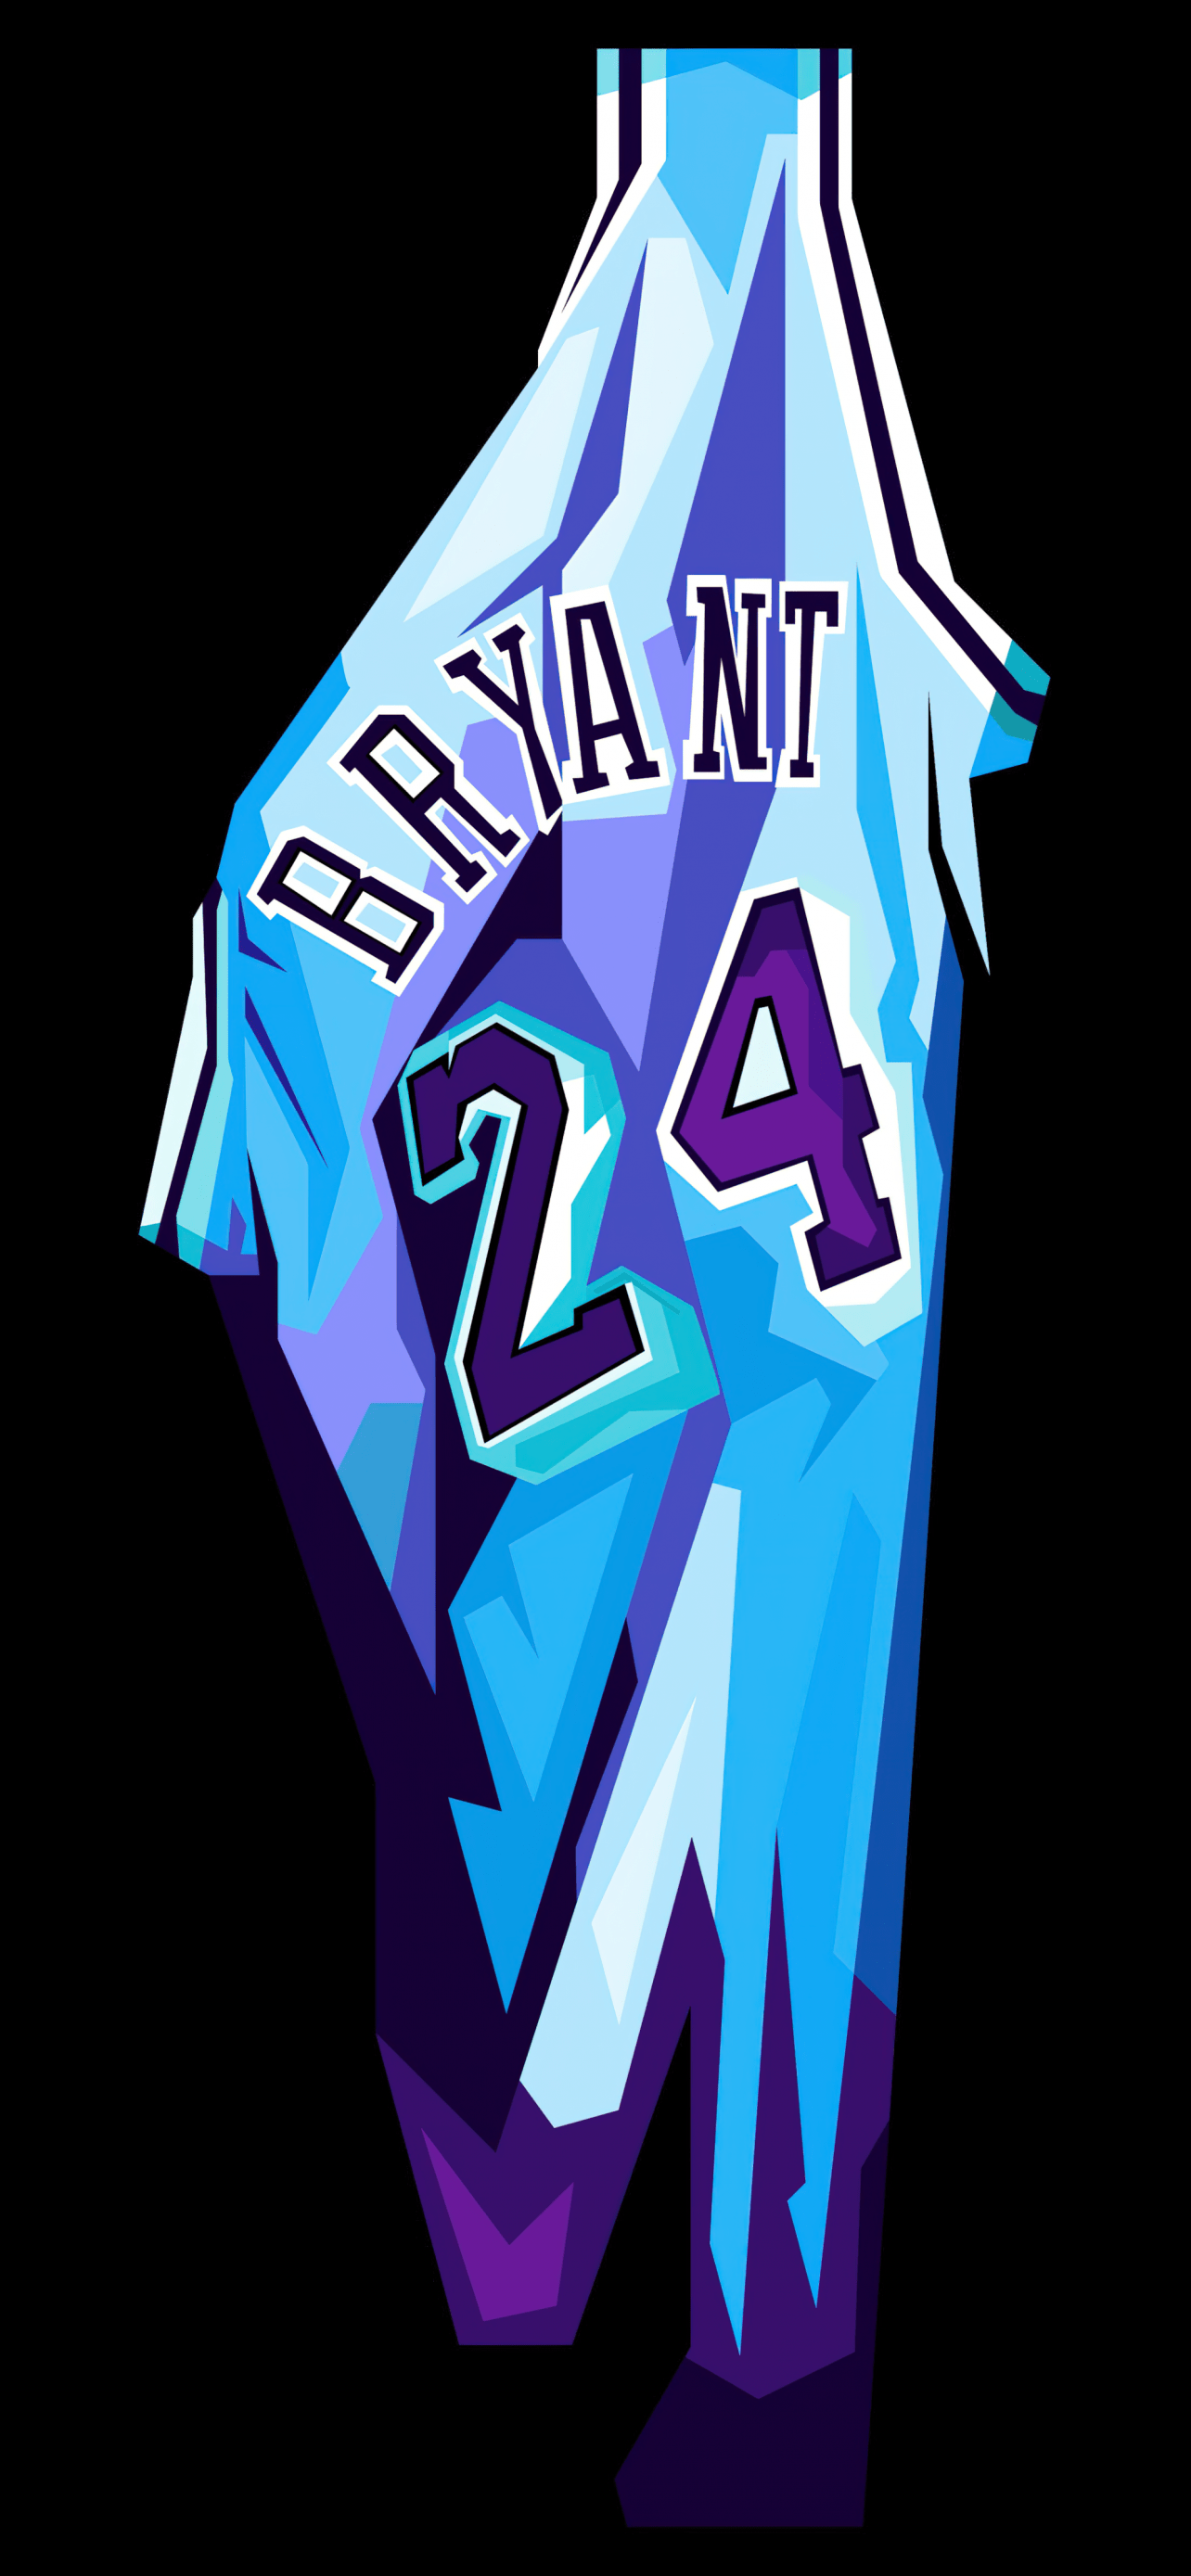 A geometrically designed basketball jersey with the number 24 on the back. - Kobe Bryant